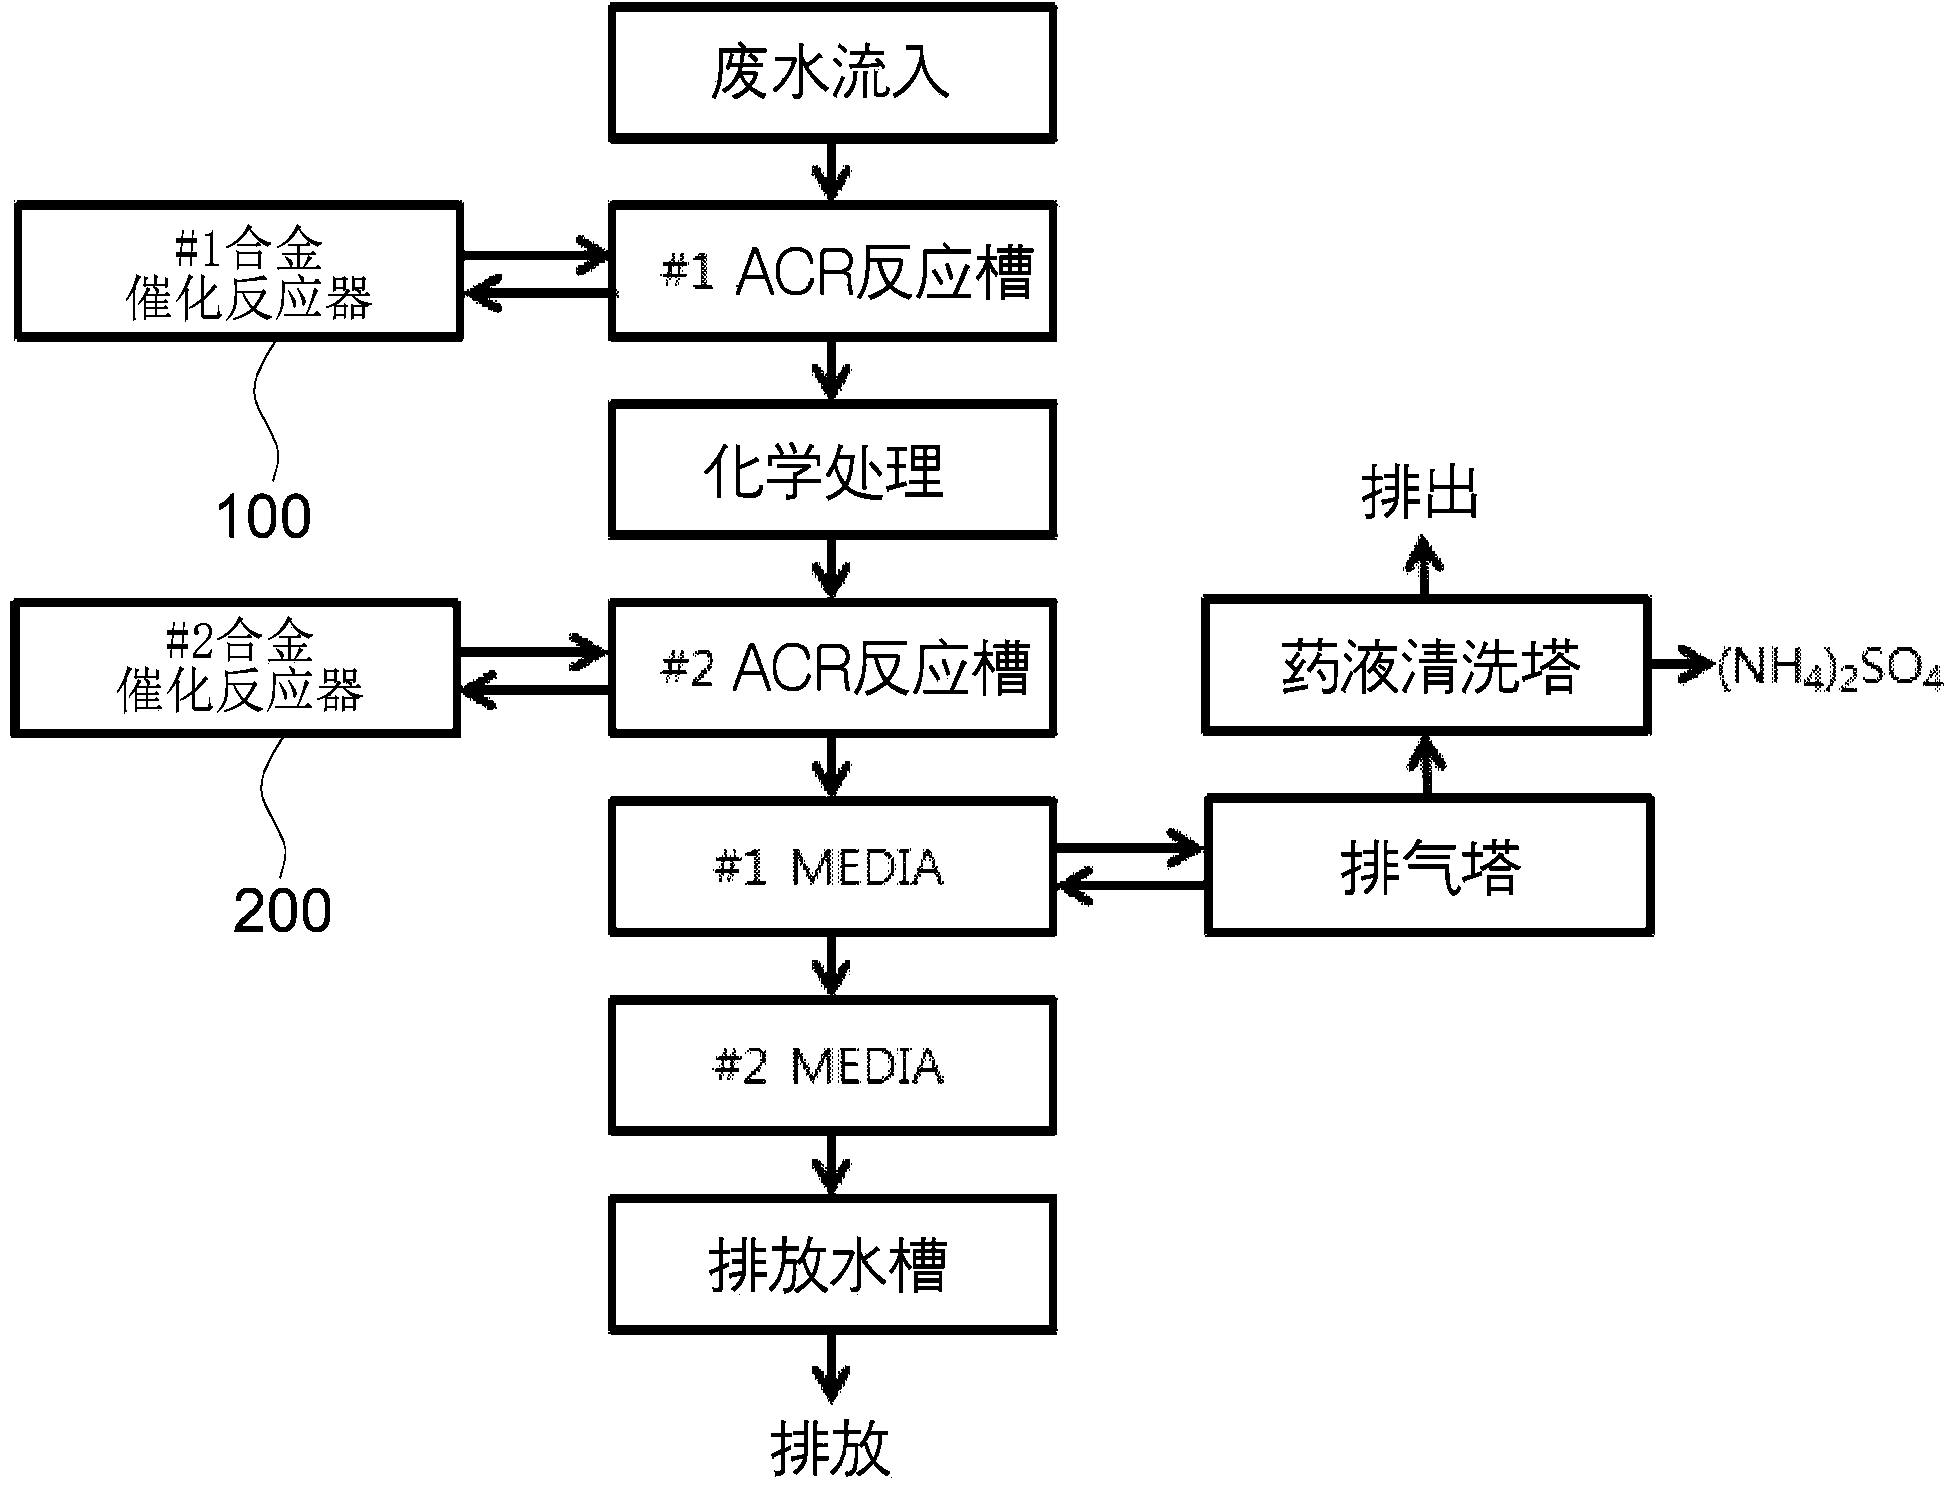 Water treatment system for treating ionic materials and hardly degradable substances by utilizing alloy catalytic reactor